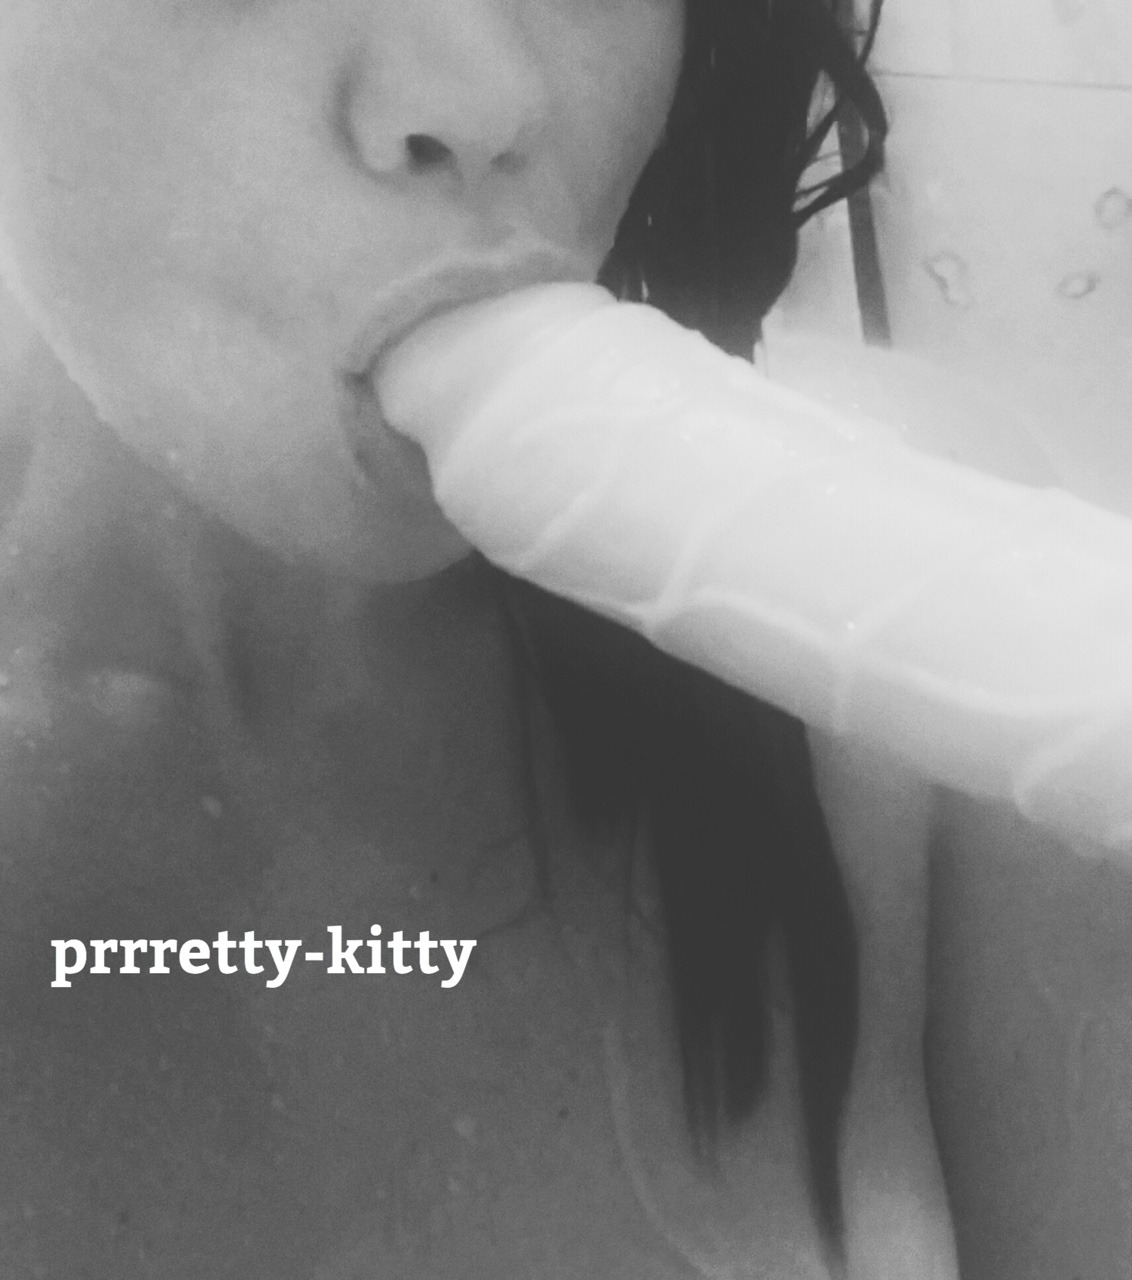 prrretty-kitty:Playing in the shower with my new toy &amp; thinking about a certain